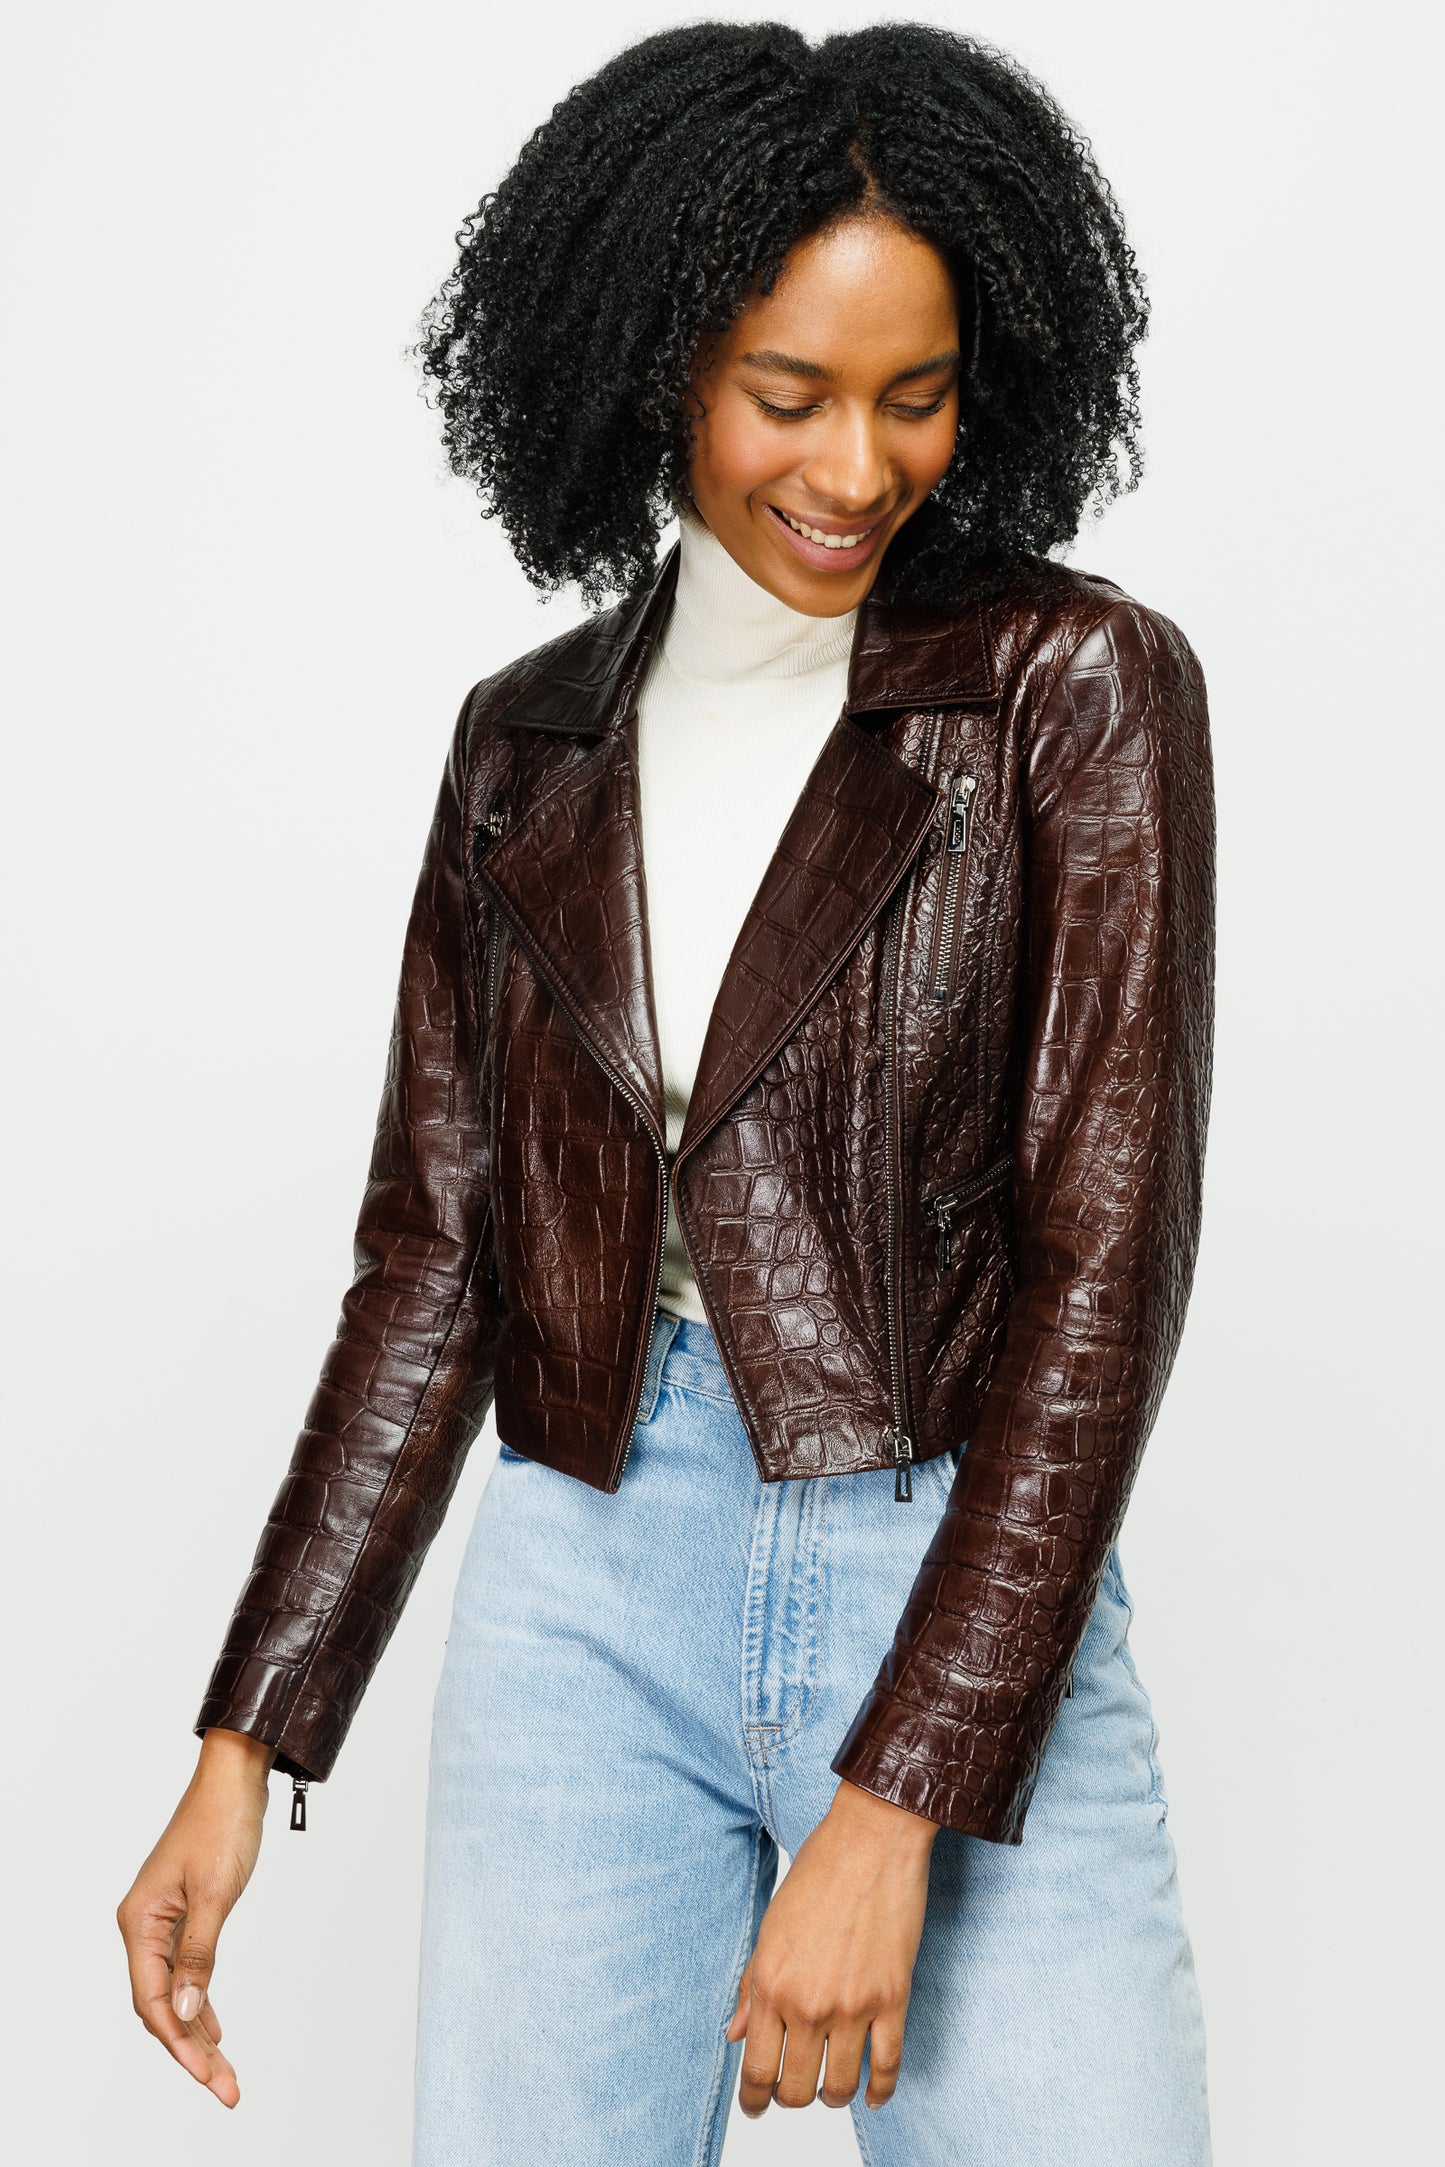 The Gramola Brown Leather Jacket